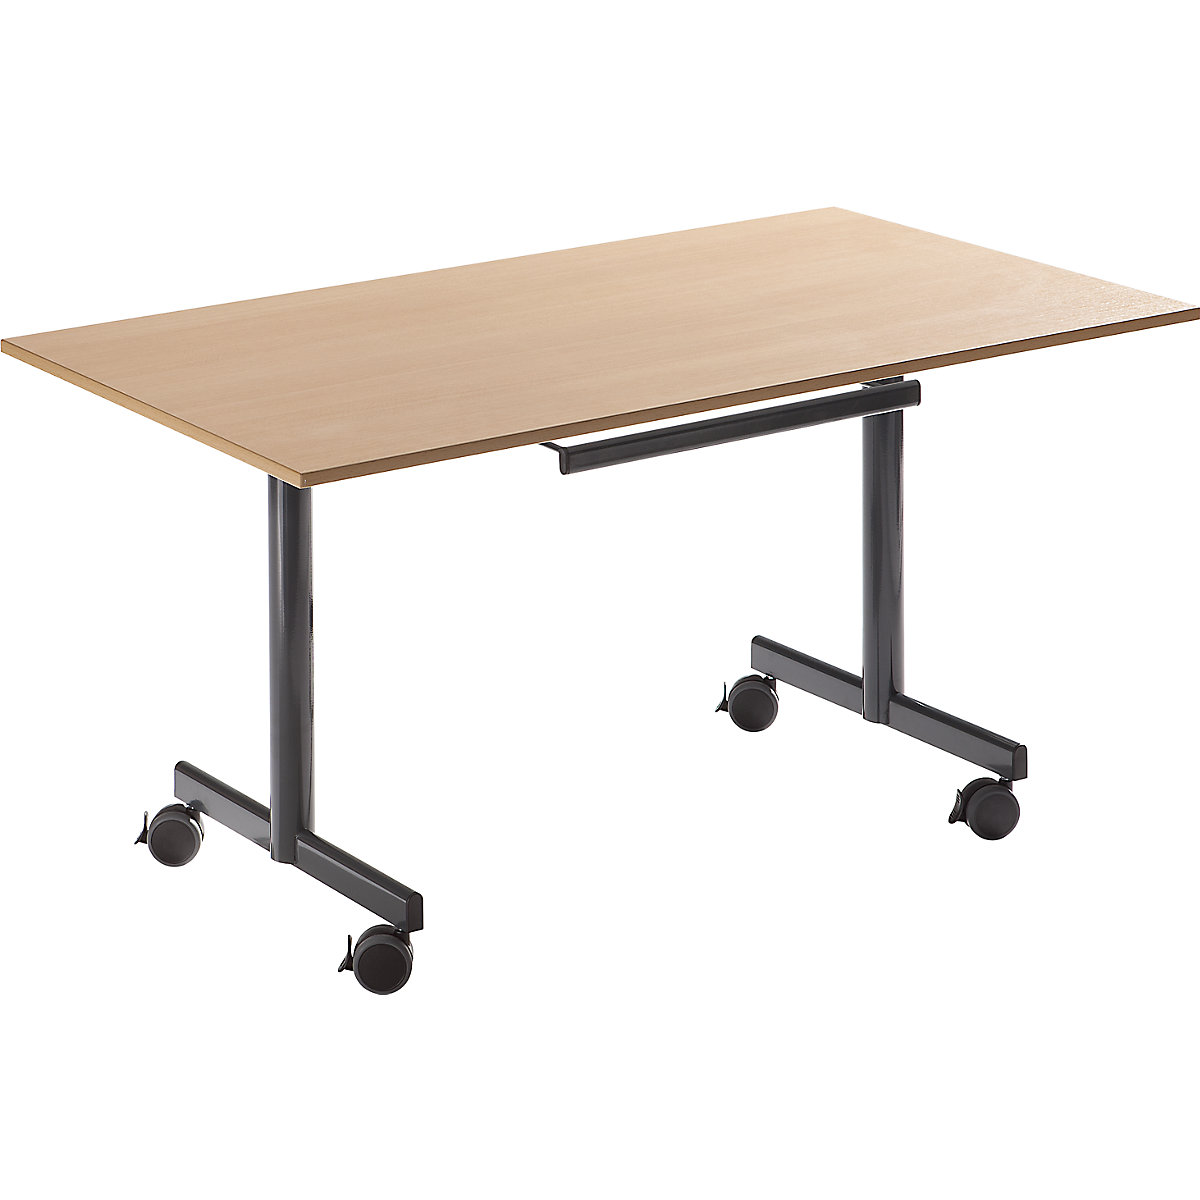 Table with folding top, mobile, HxWxD 720 x 1400 x 800 mm, beech finish-3